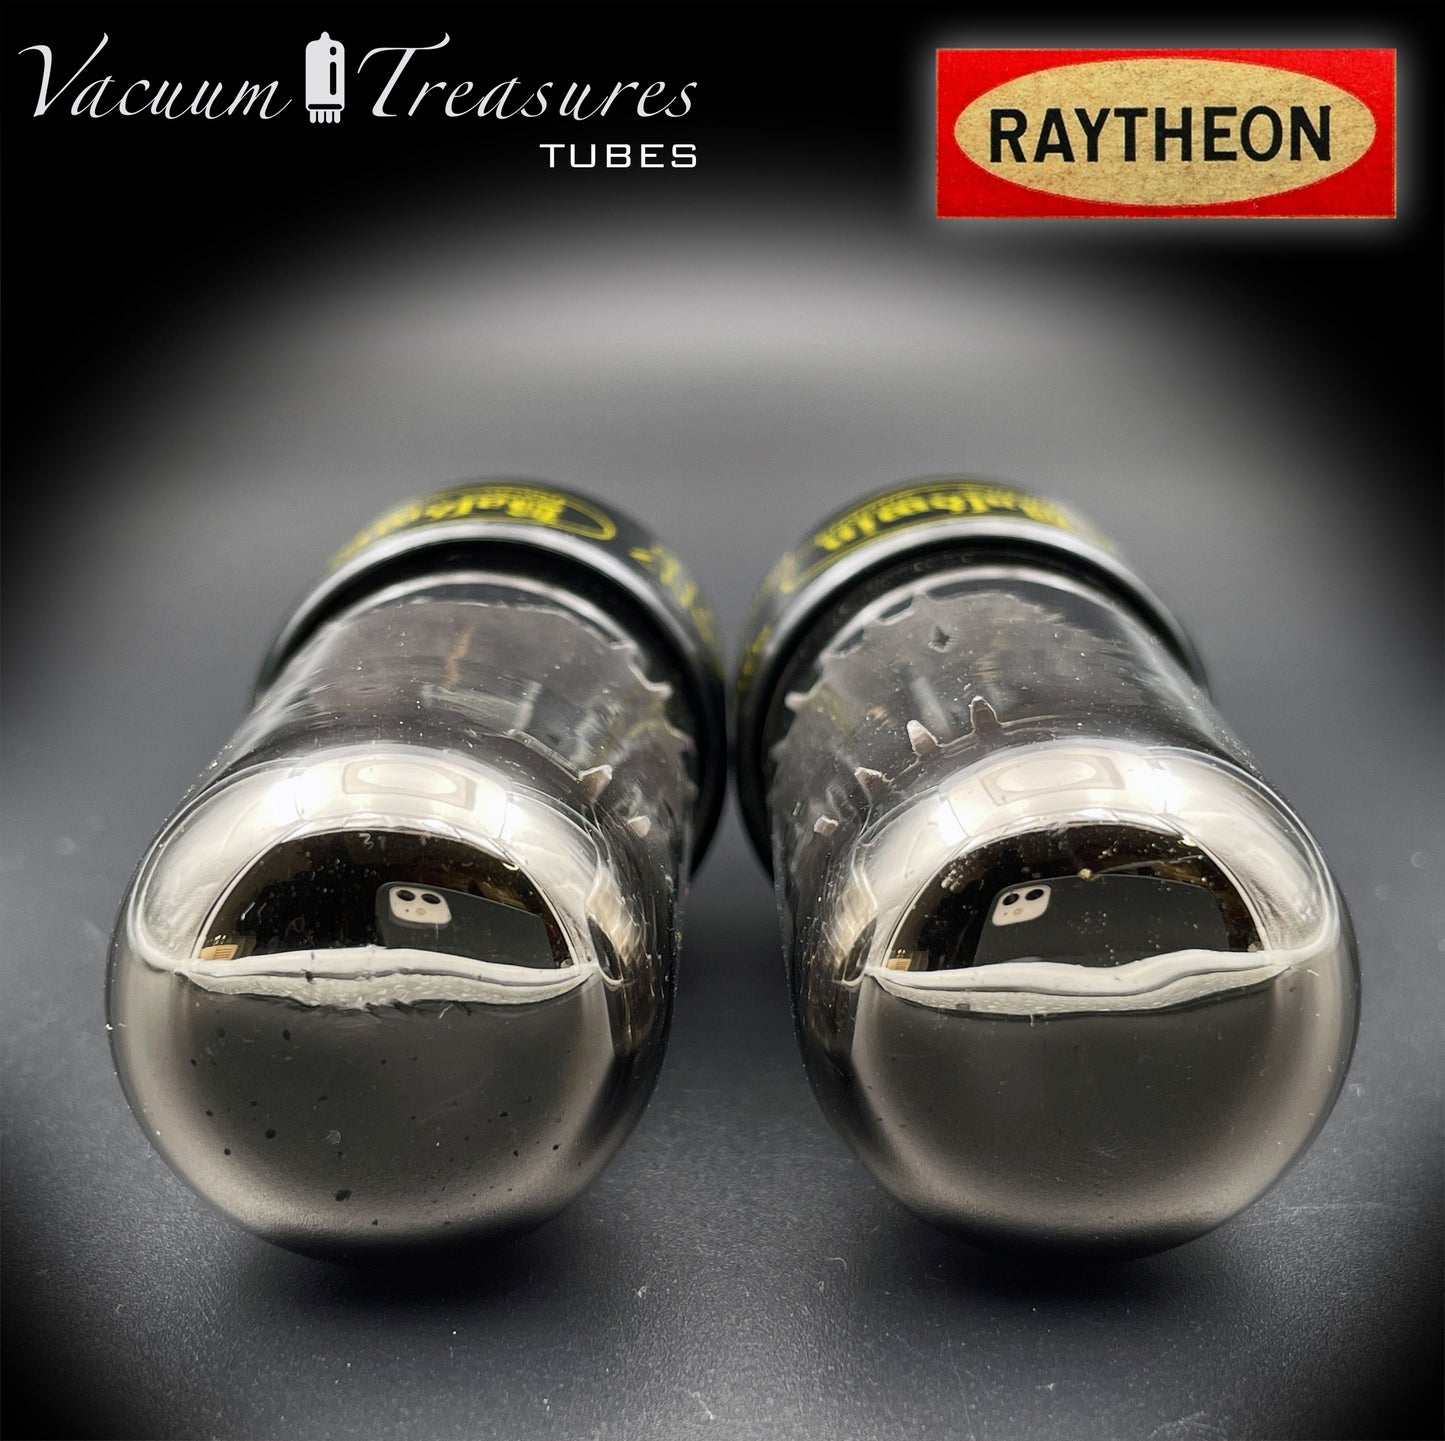 6SN7 GTB NOS RAYTHEON Black Plates O Getter Matched Tubes Made in USA '60